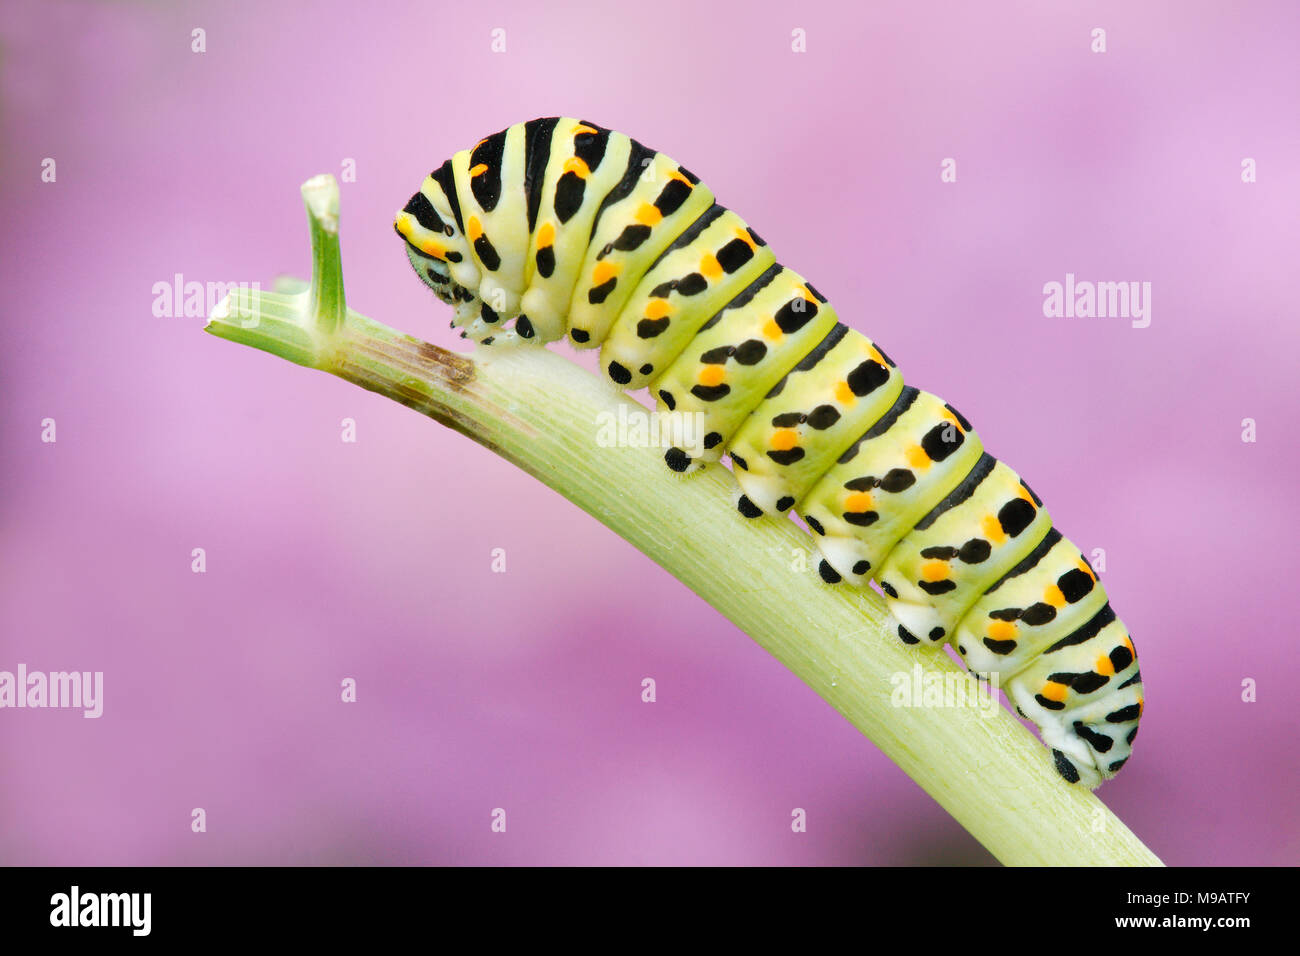 Swallowtail Butterfly Caterpillar feeding on fennel Papilio Machaon gorganus photographed in Pont-Aven, South West Brittany, France Stock Photo